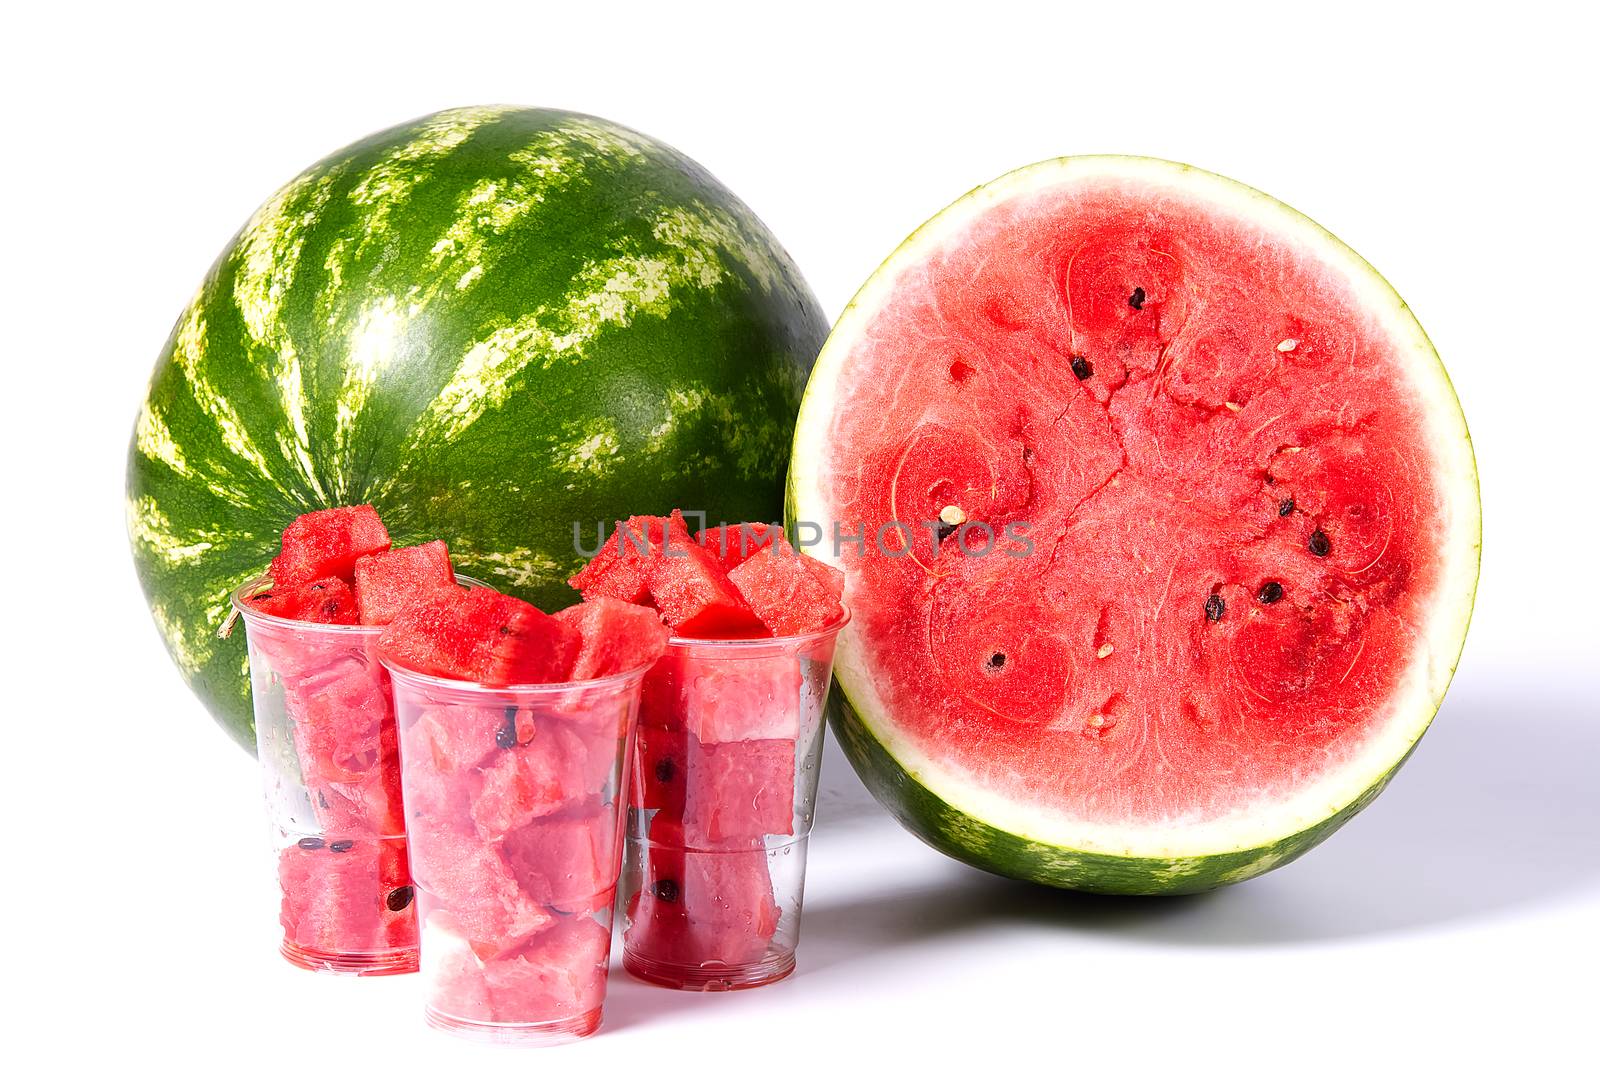 sliced red watermelon cubes in plastic cup a front of Fresh organic green watermelon and sliced half of watermelon with red texture